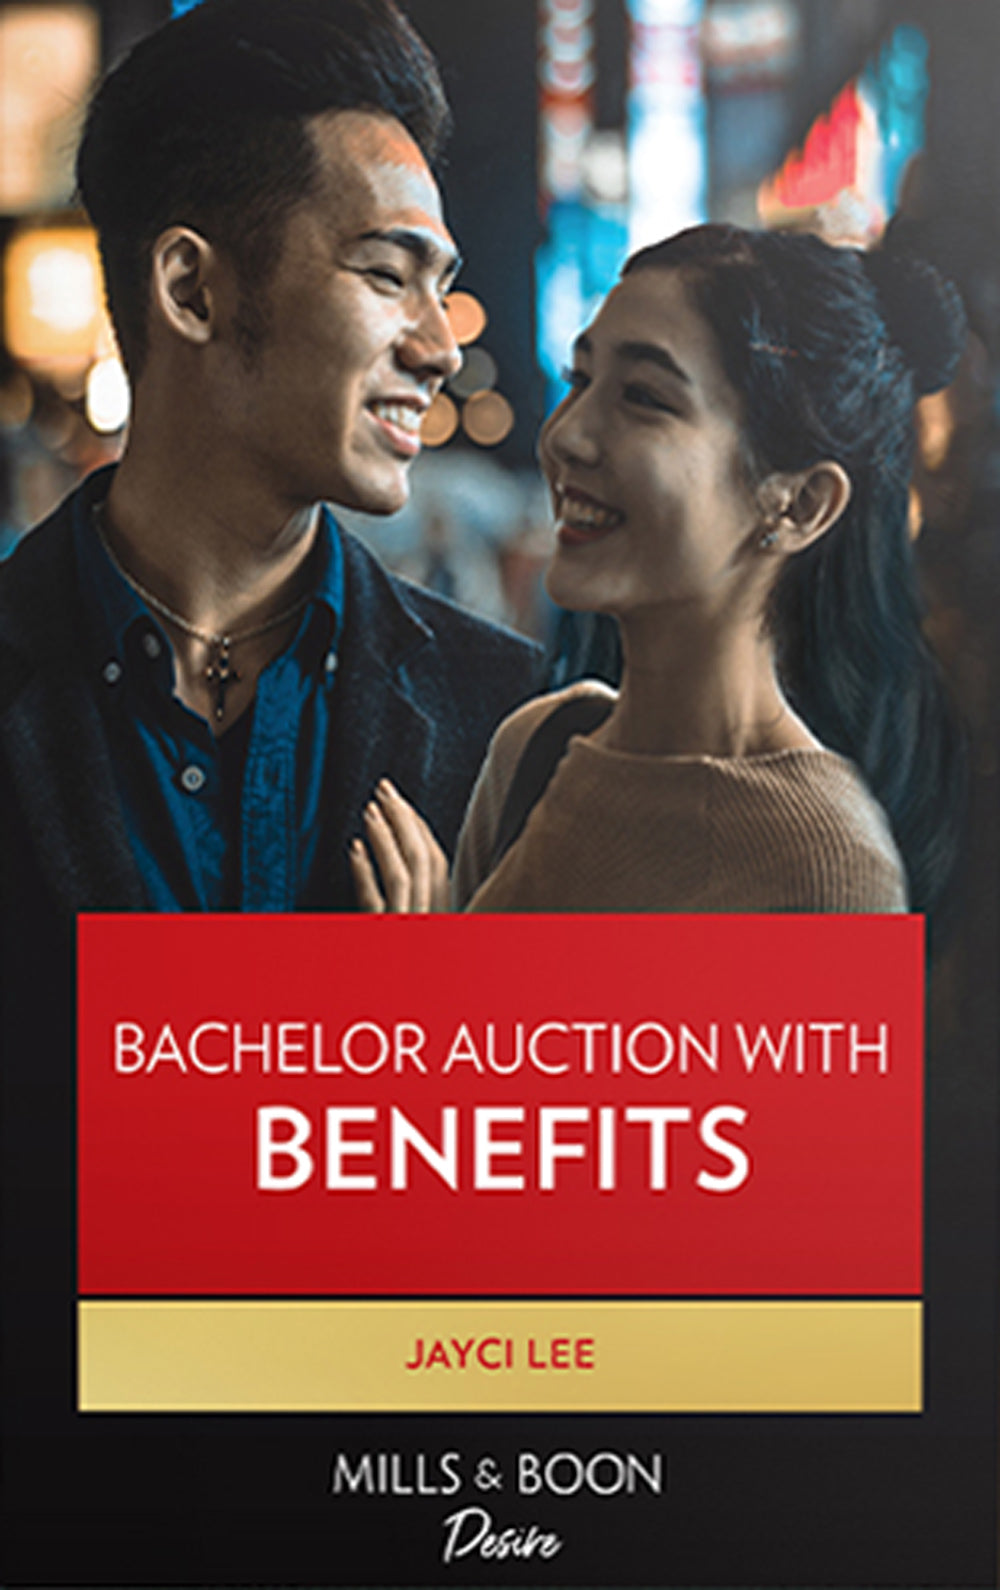 Bachelor Auction with Benefits - Chapter 2